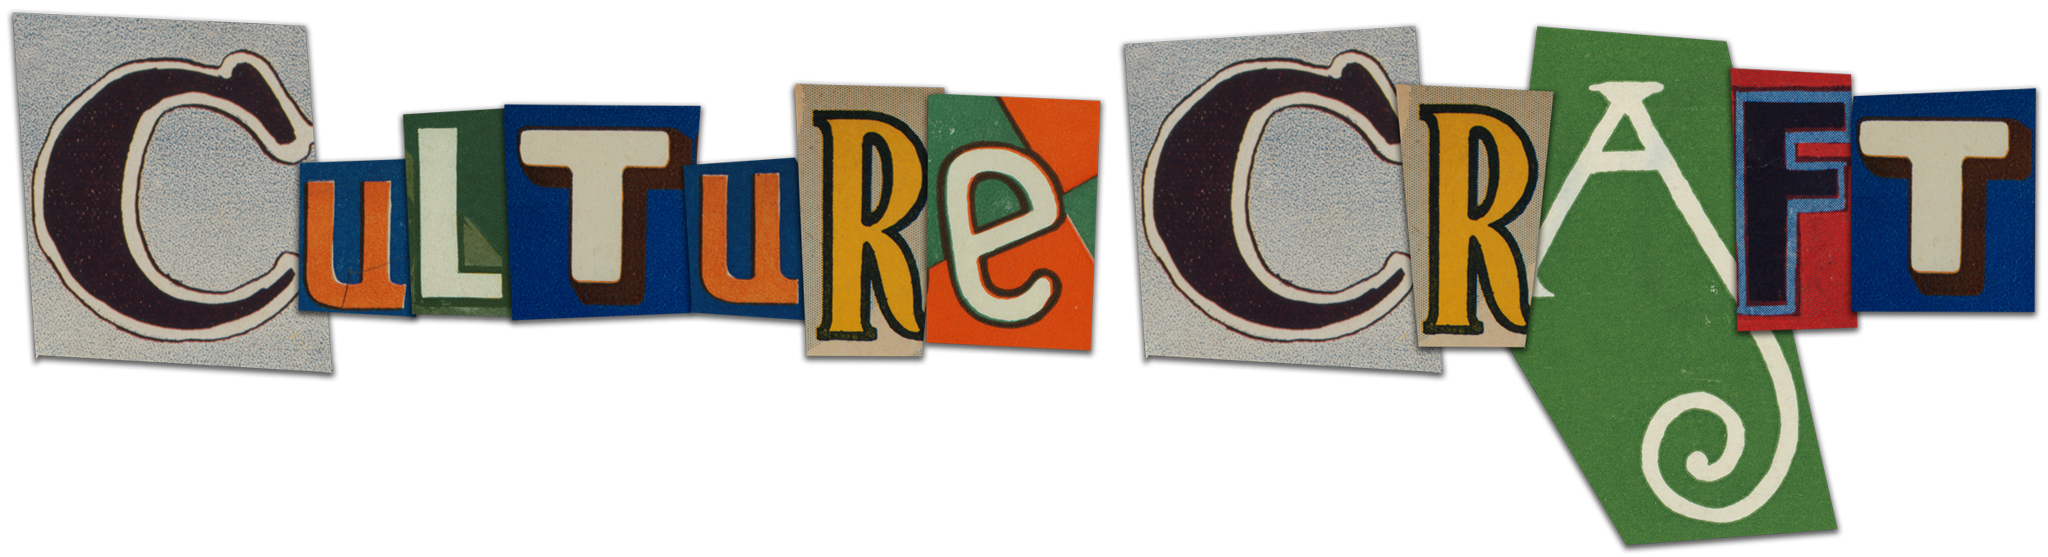 CultureCraft logo where each letter is a cut out from a different reference image of different colors and styles